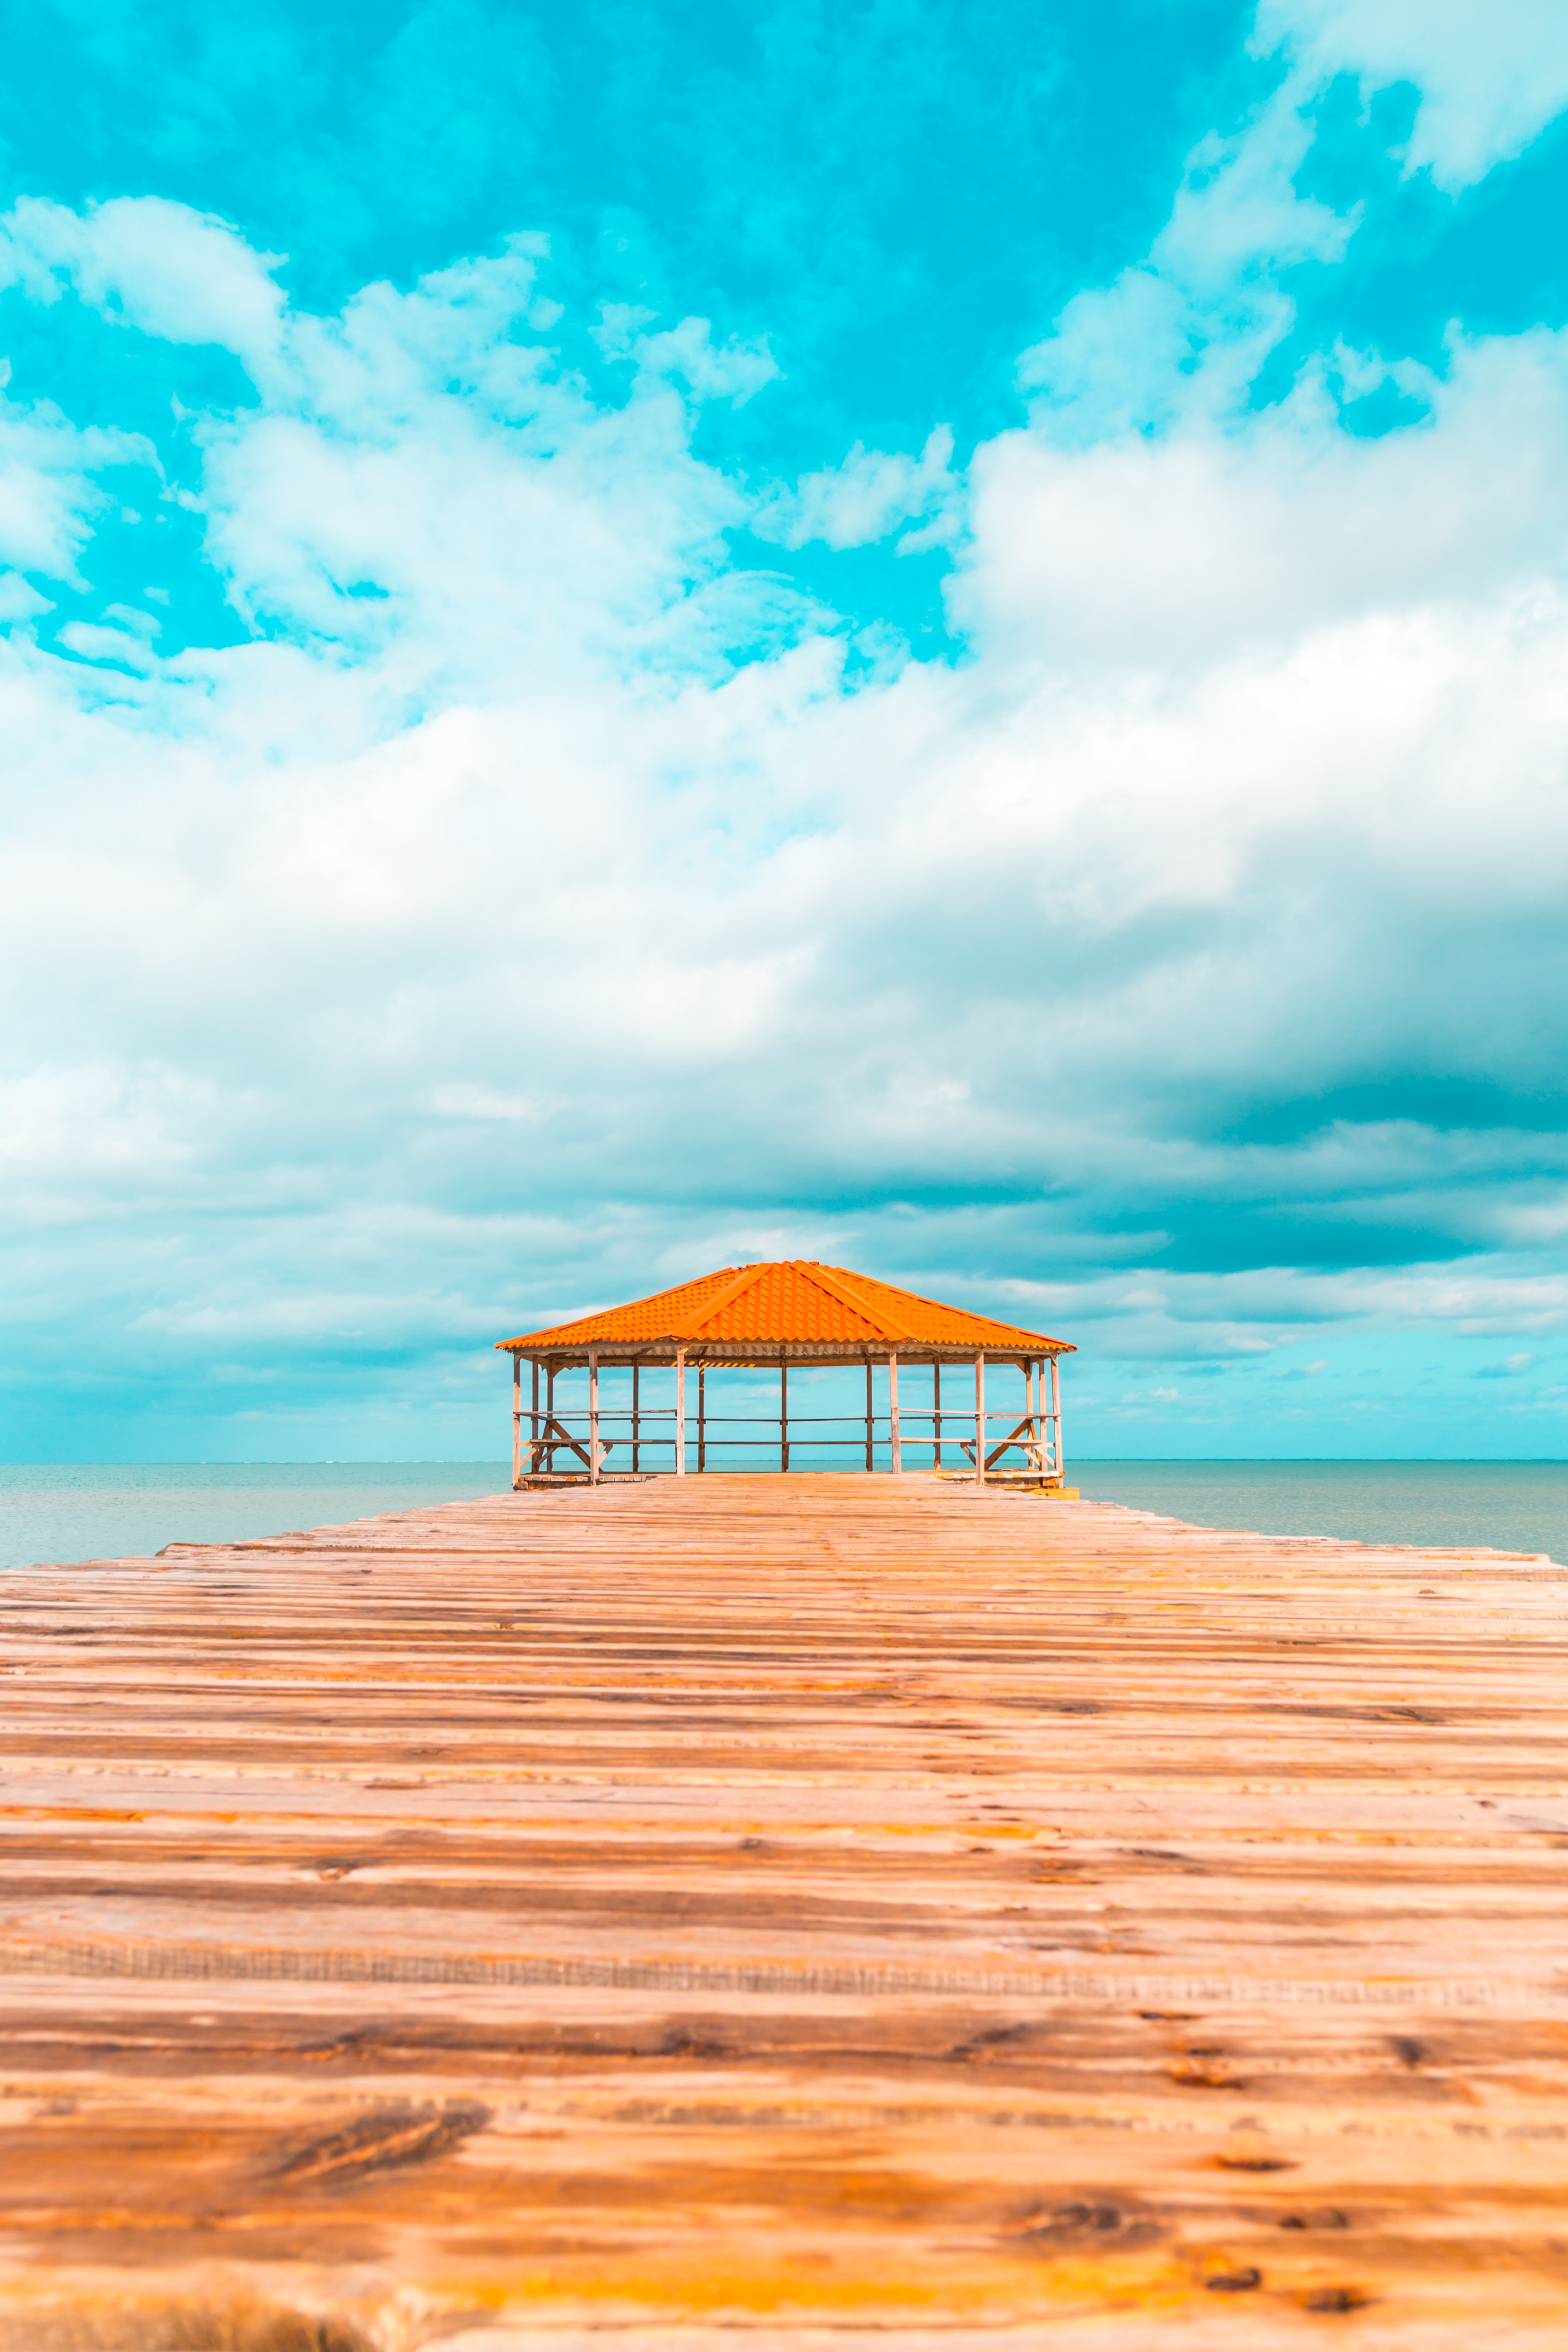 relaxation, rest, pier, nature, clouds, ocean, tropics, bower, alcove